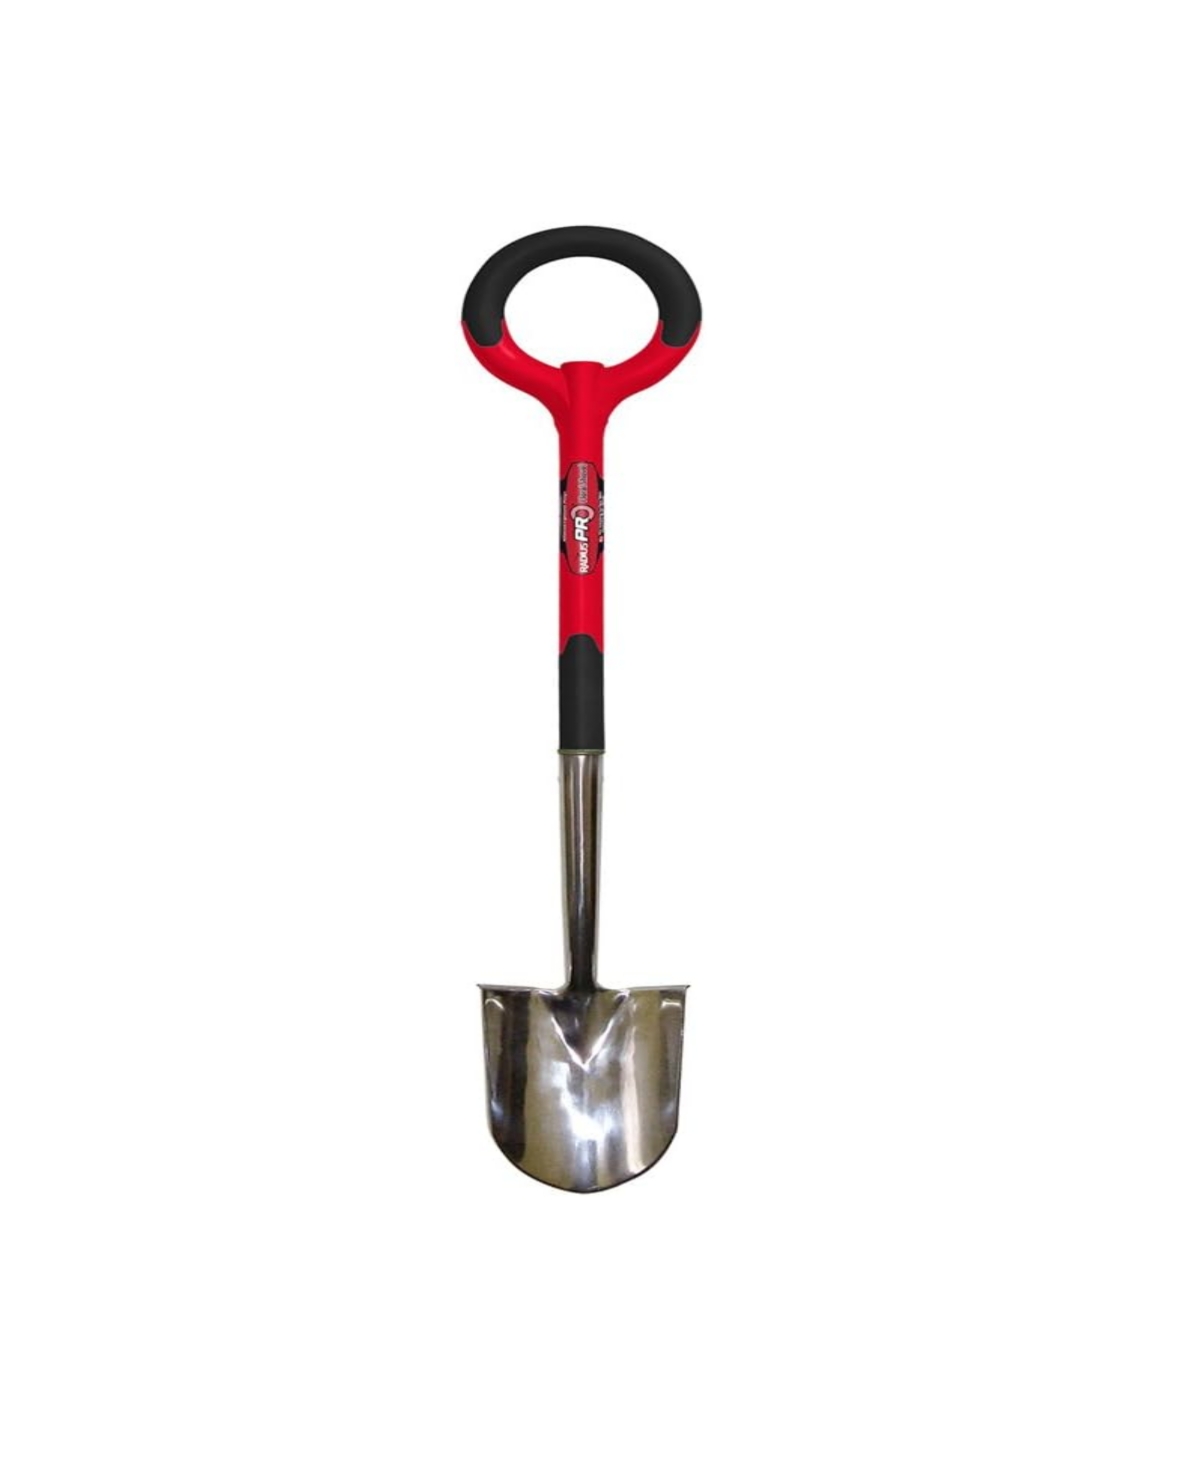 Pro Ergonomic Stainless Steel Floral Shovel, Red - Red